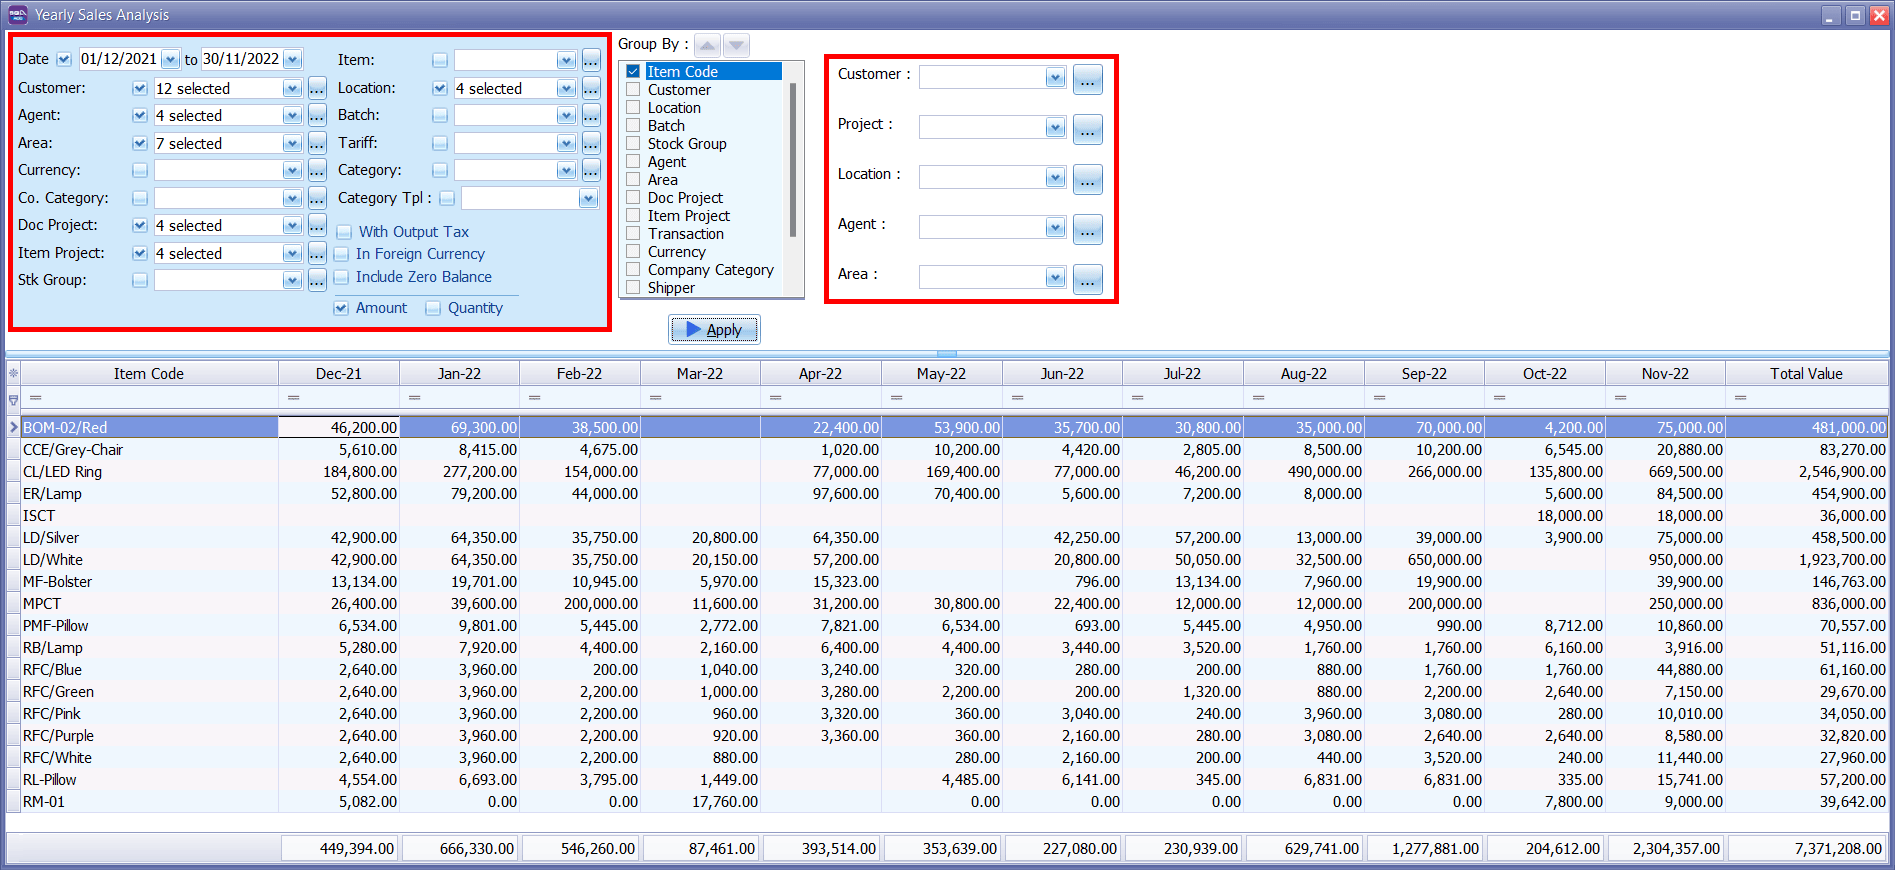 SQL Accounting Software - Branch Analysis Reports